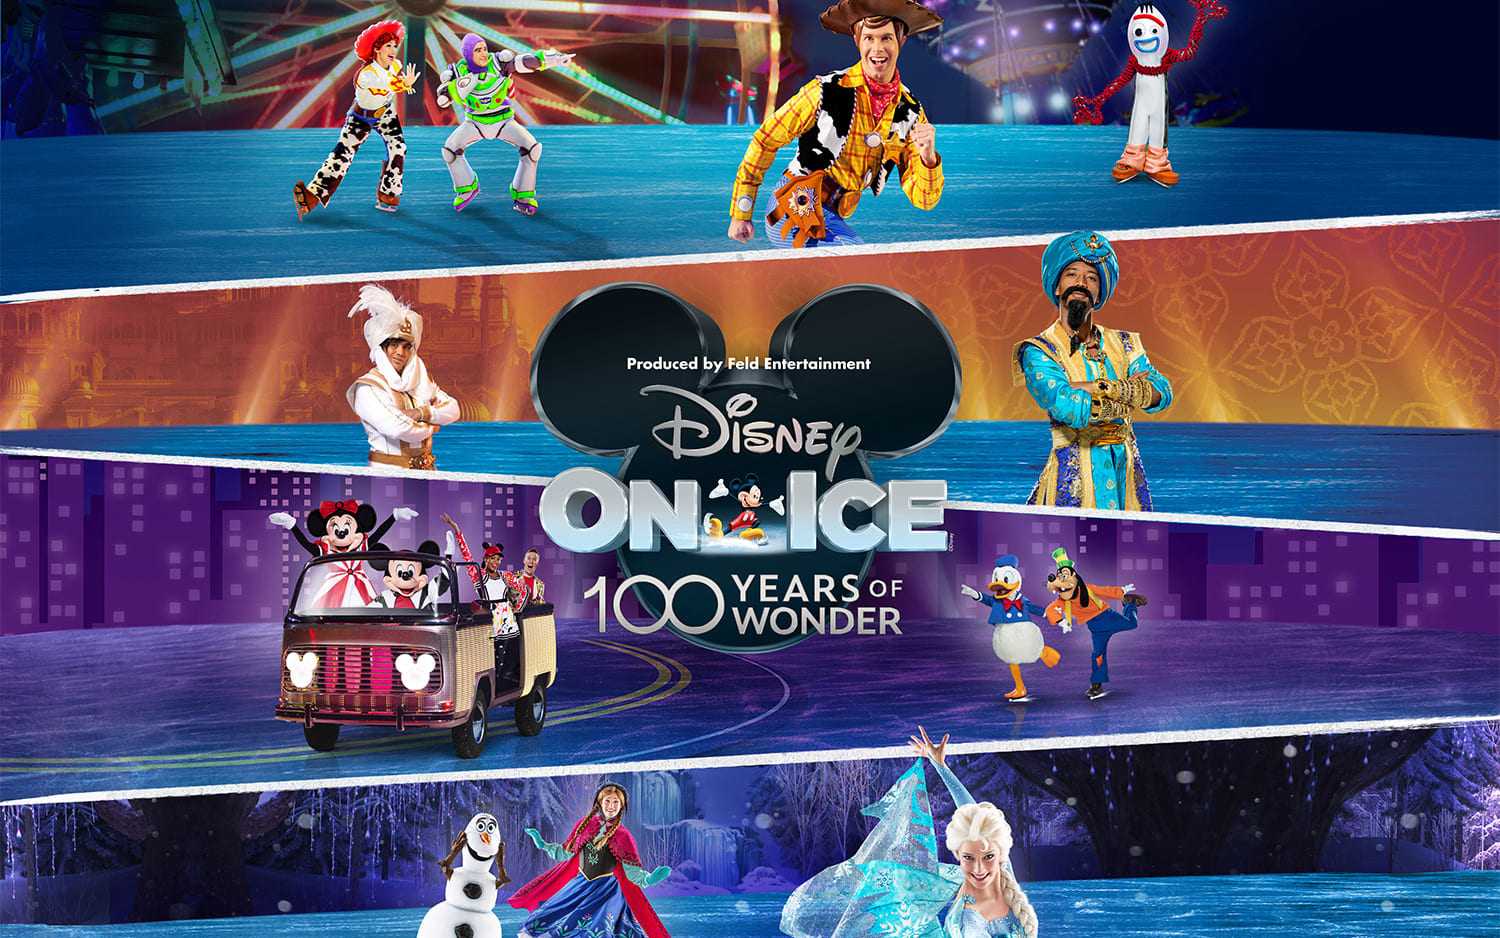 LOOK: Ticket prices for 'Disney on Ice' this December revealed